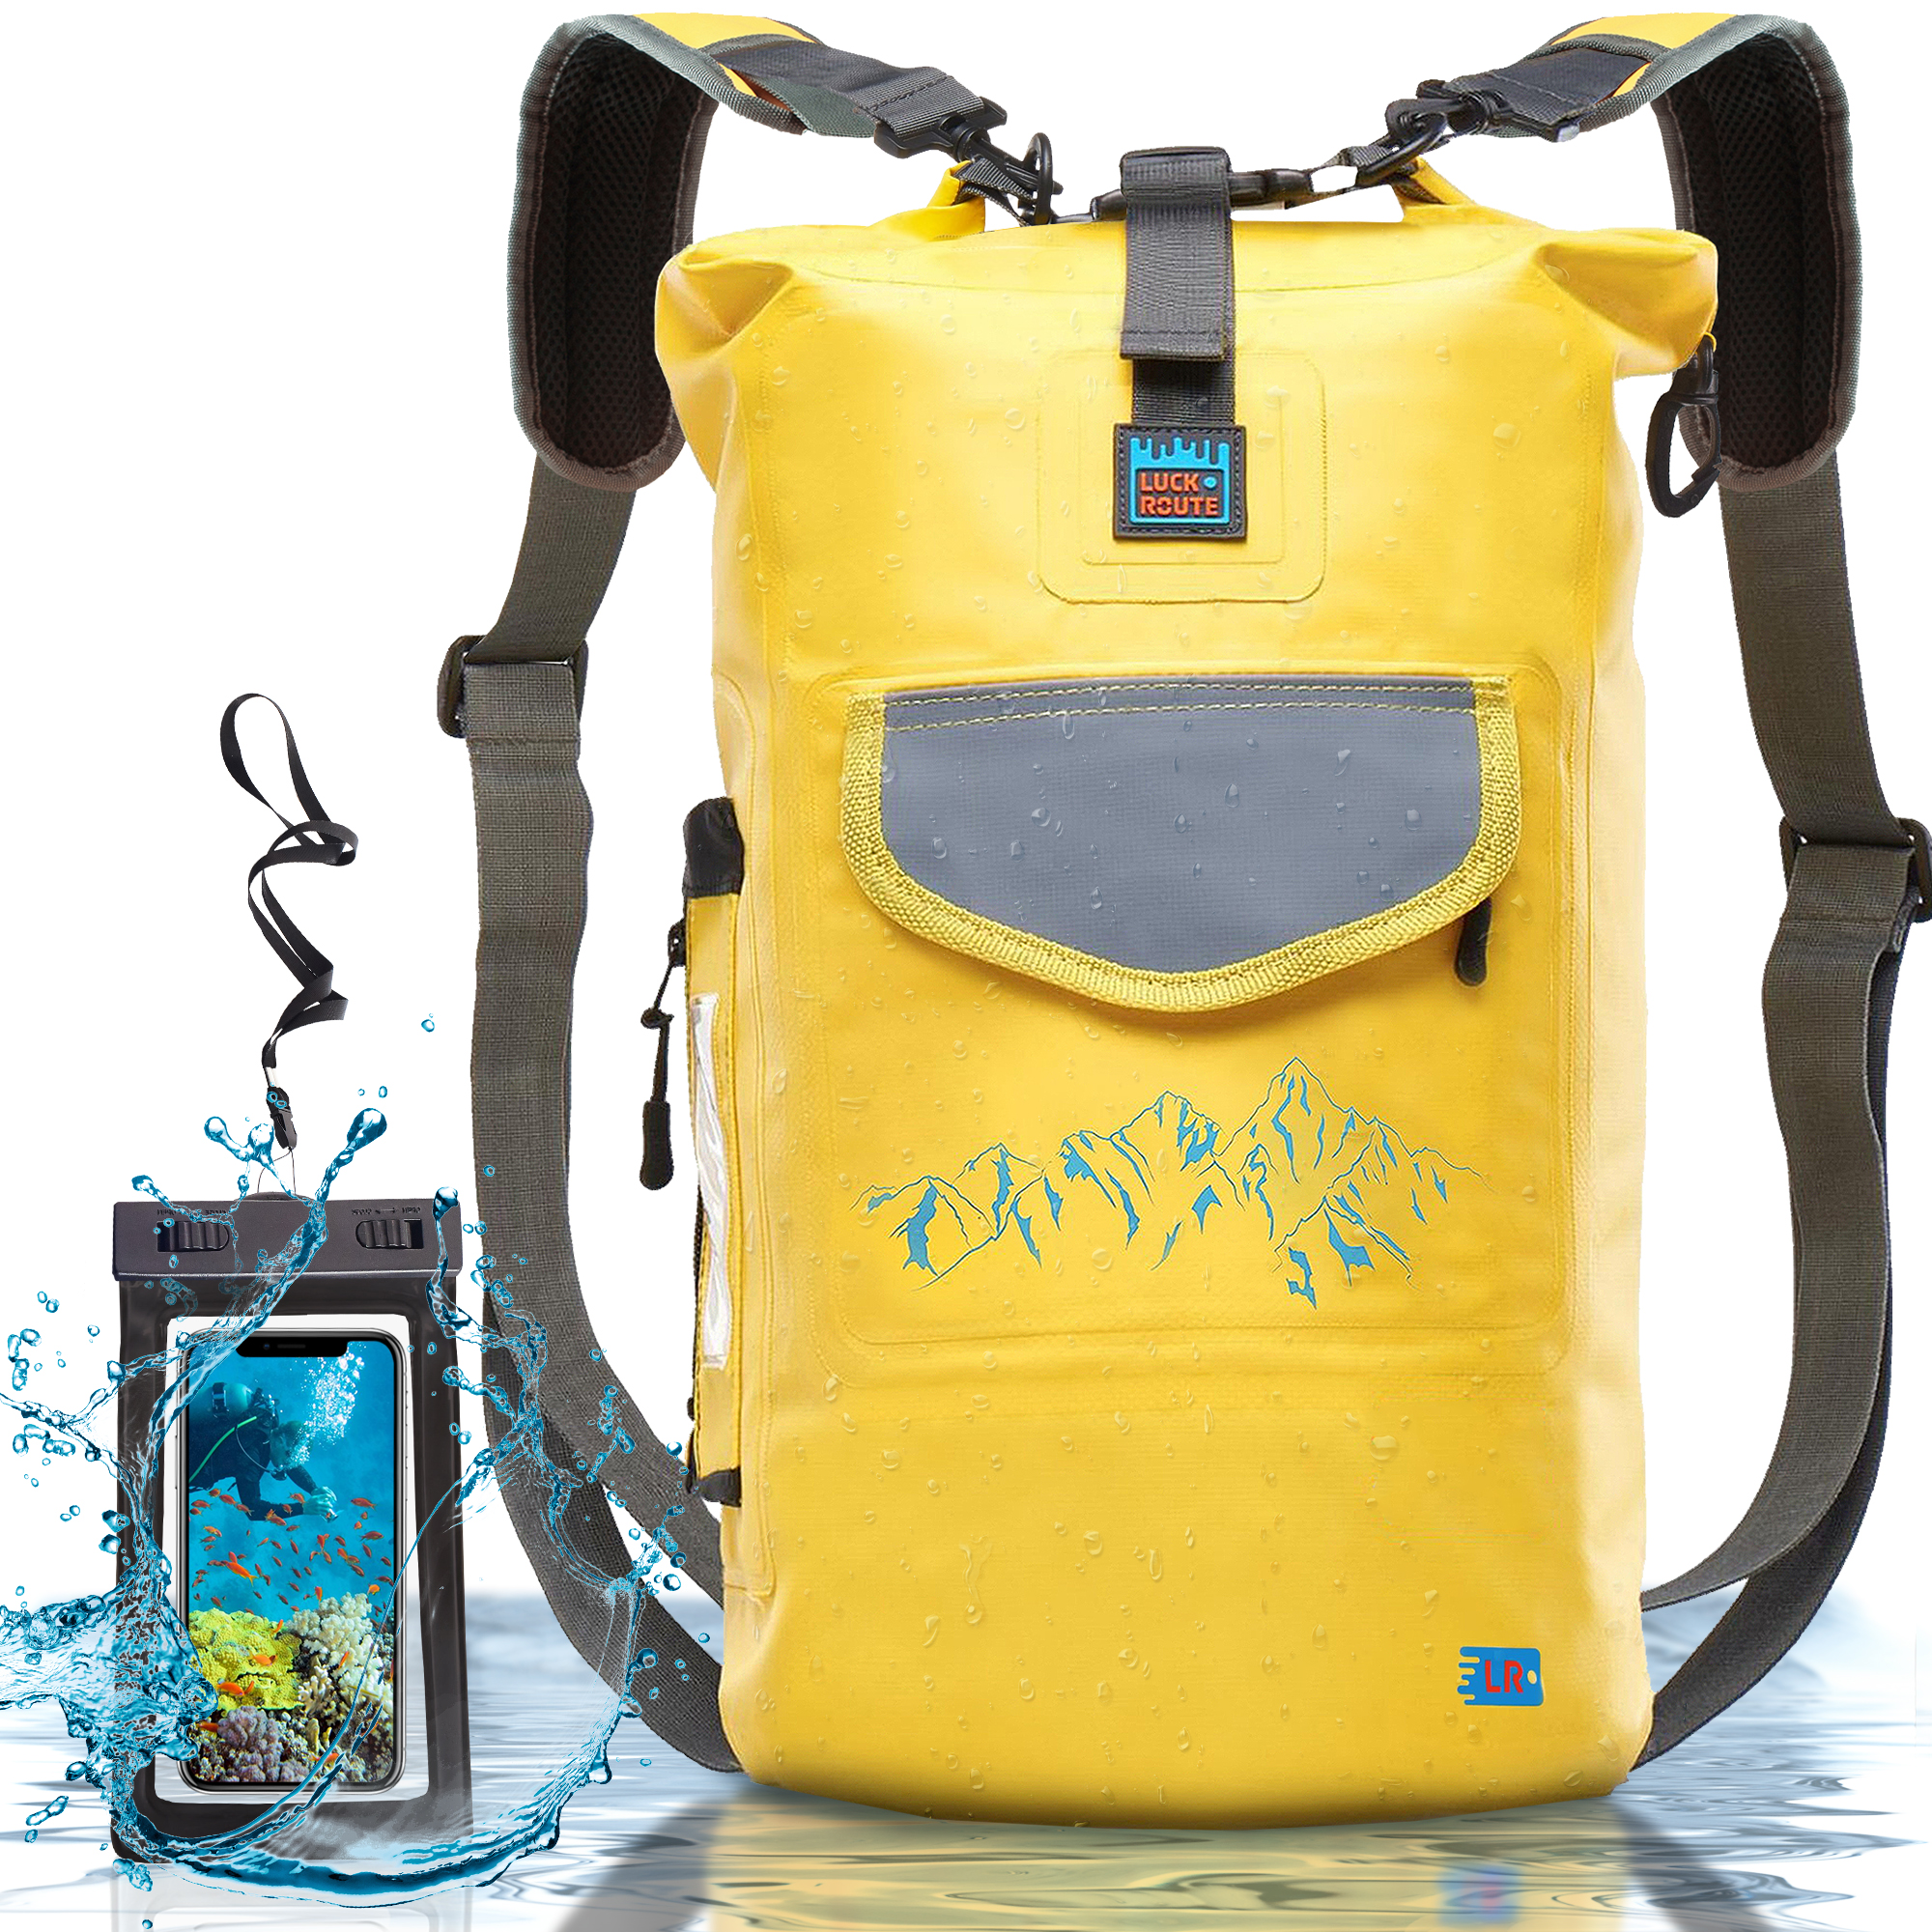 Luck route Dry Bag 20L Yellow Two Straps